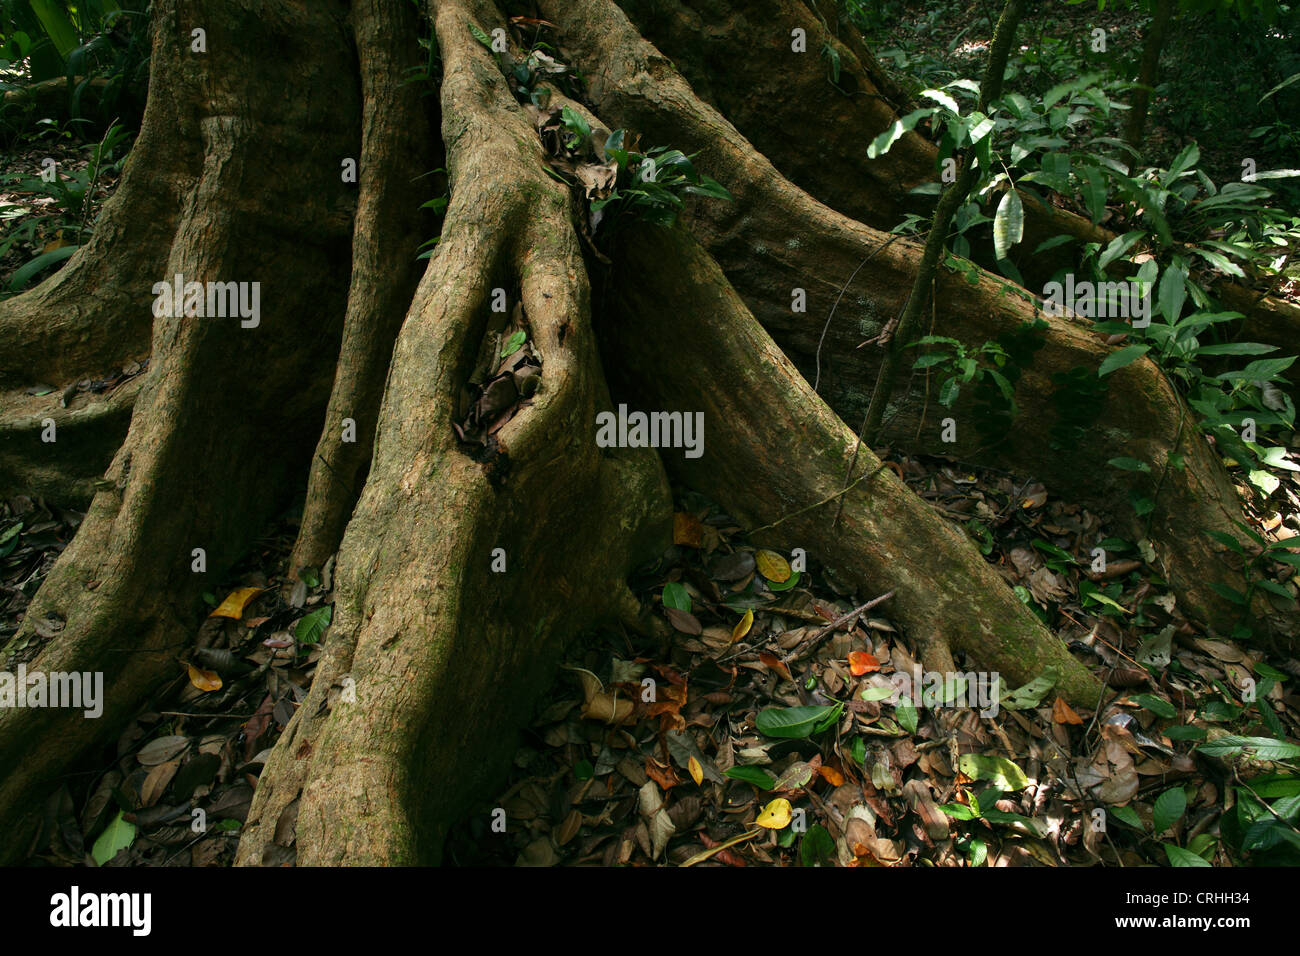 Buttress roots in rainforest. Corcovado National Park, Osa Peninsula, Costa Rica. March 2012. Stock Photo